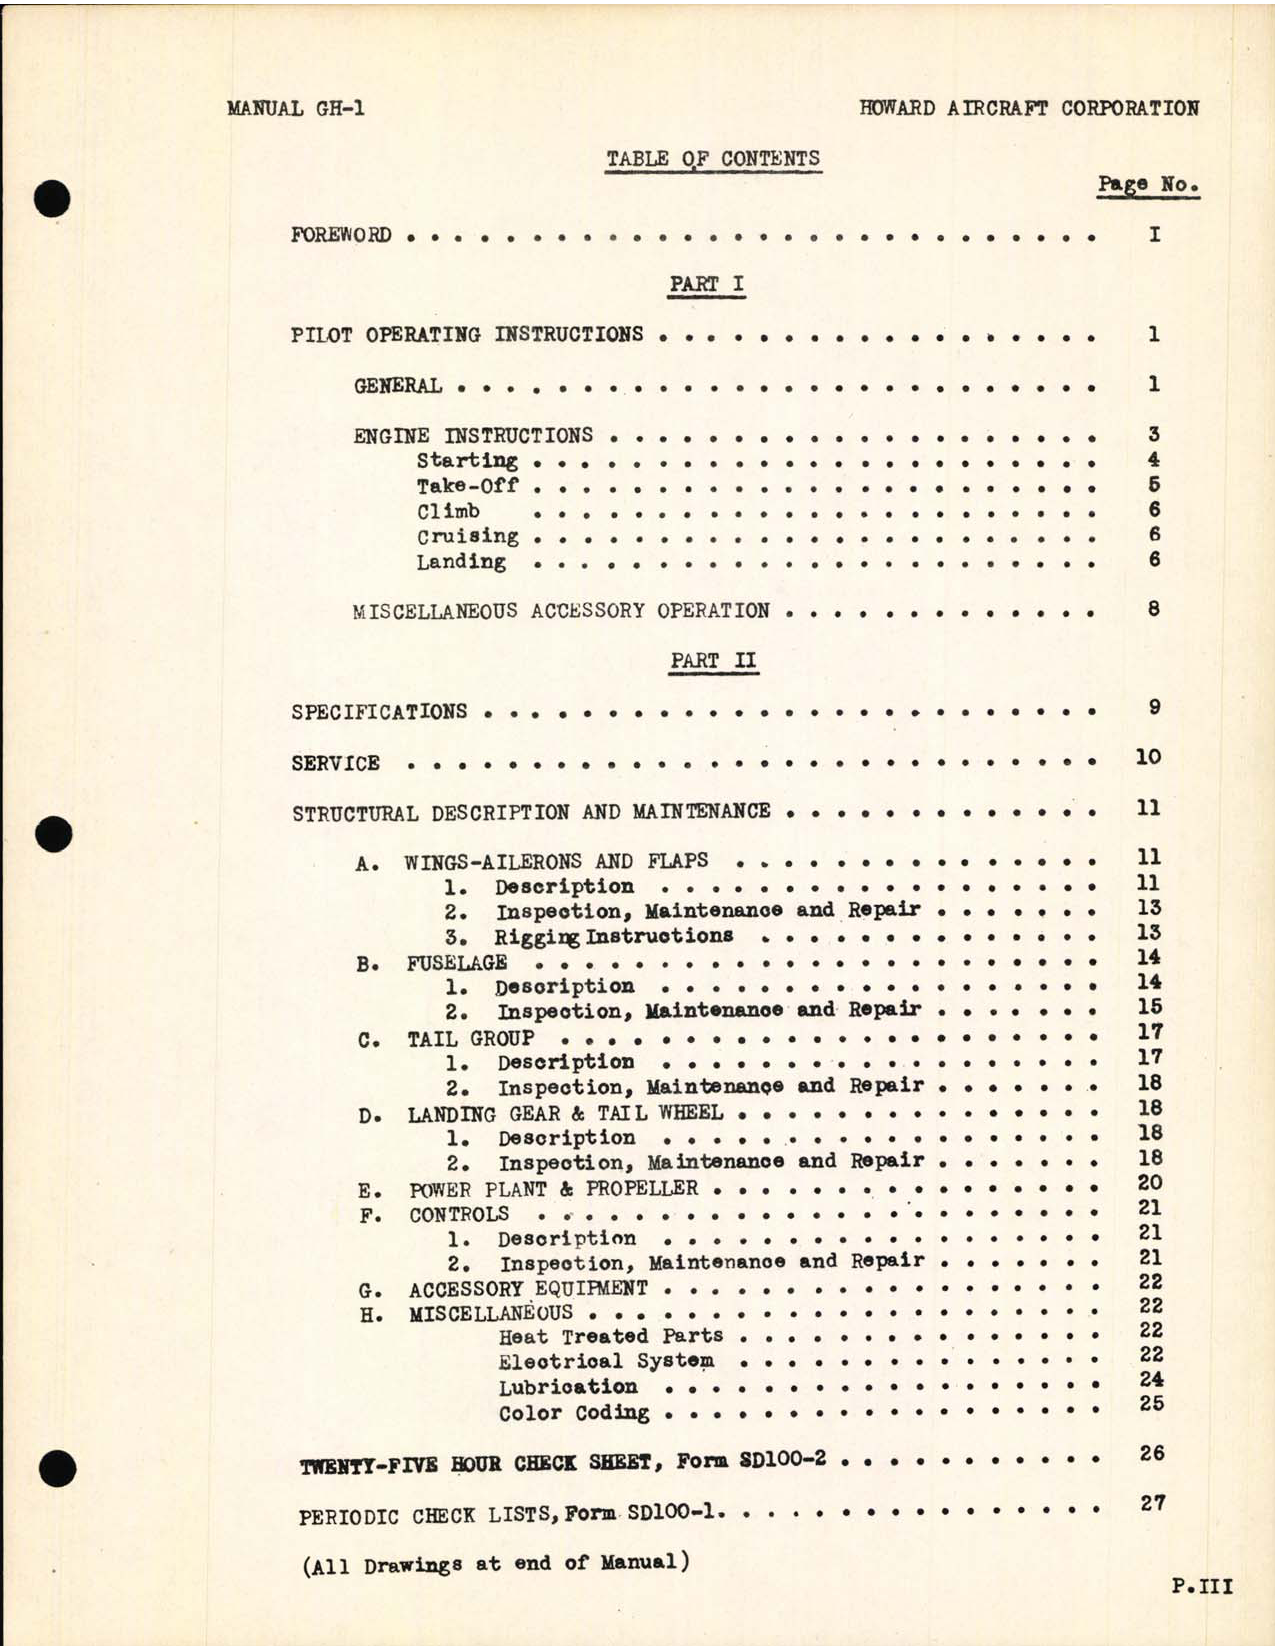 Sample page 9 from AirCorps Library document: Erection and Maintenance Manual for Model GH-1 Airplane